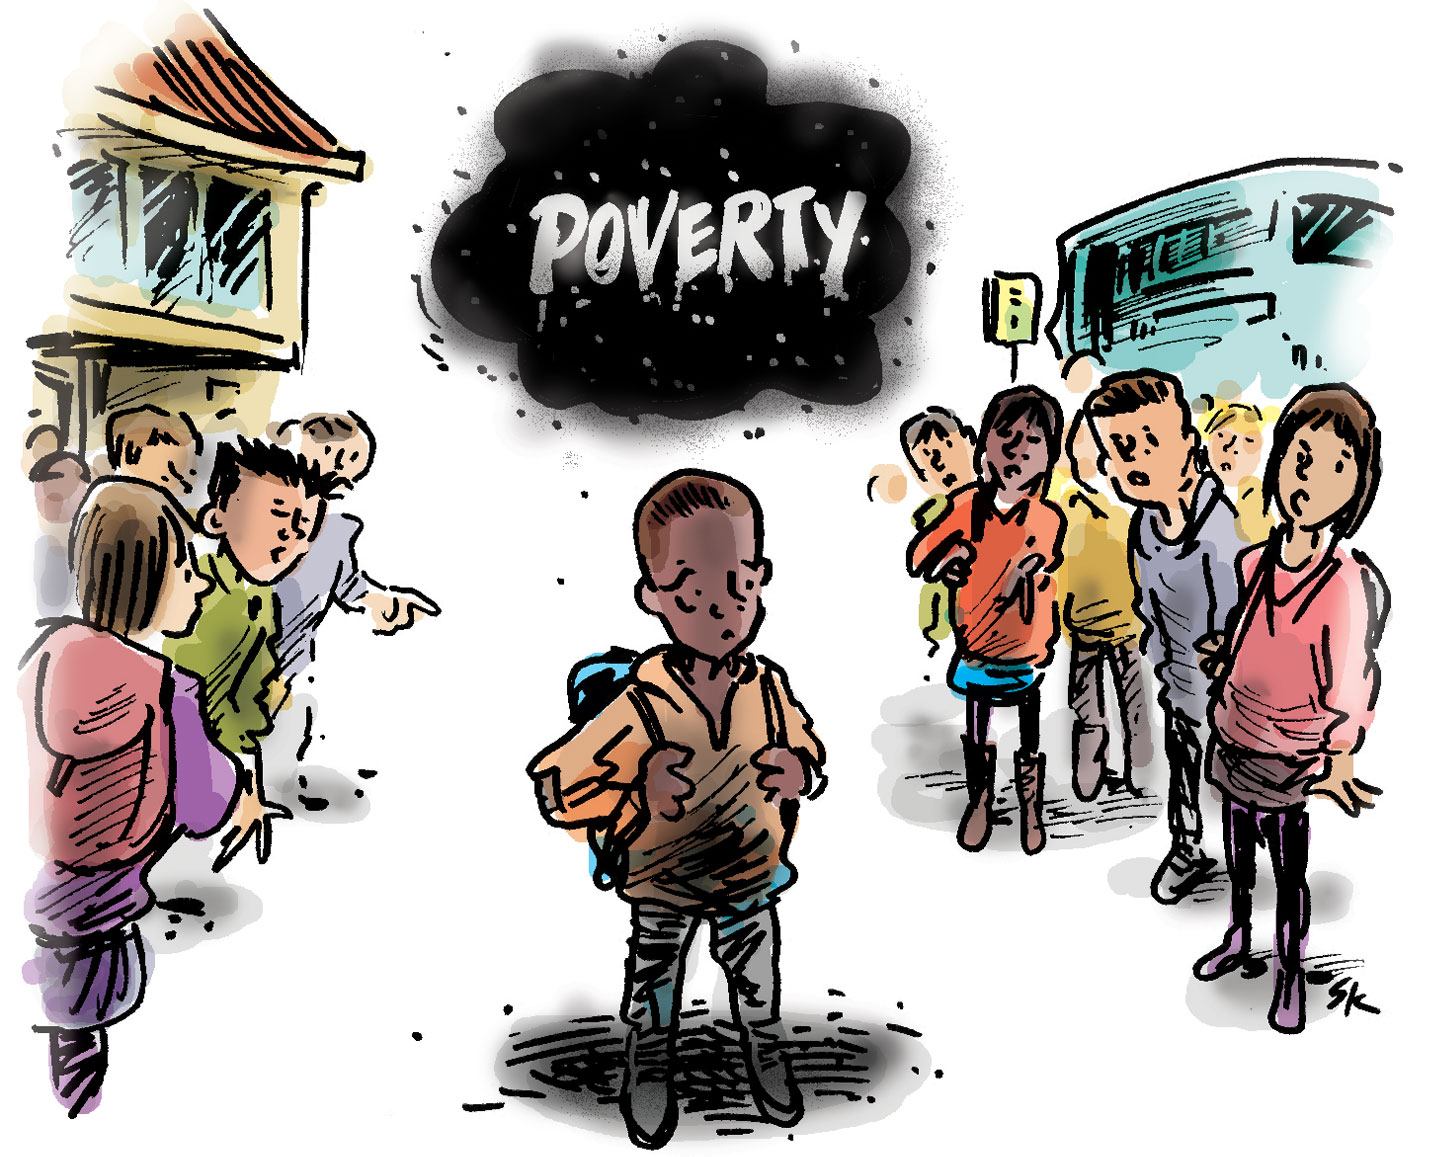 IV. Strategies to Address the Impact of Poverty on Education